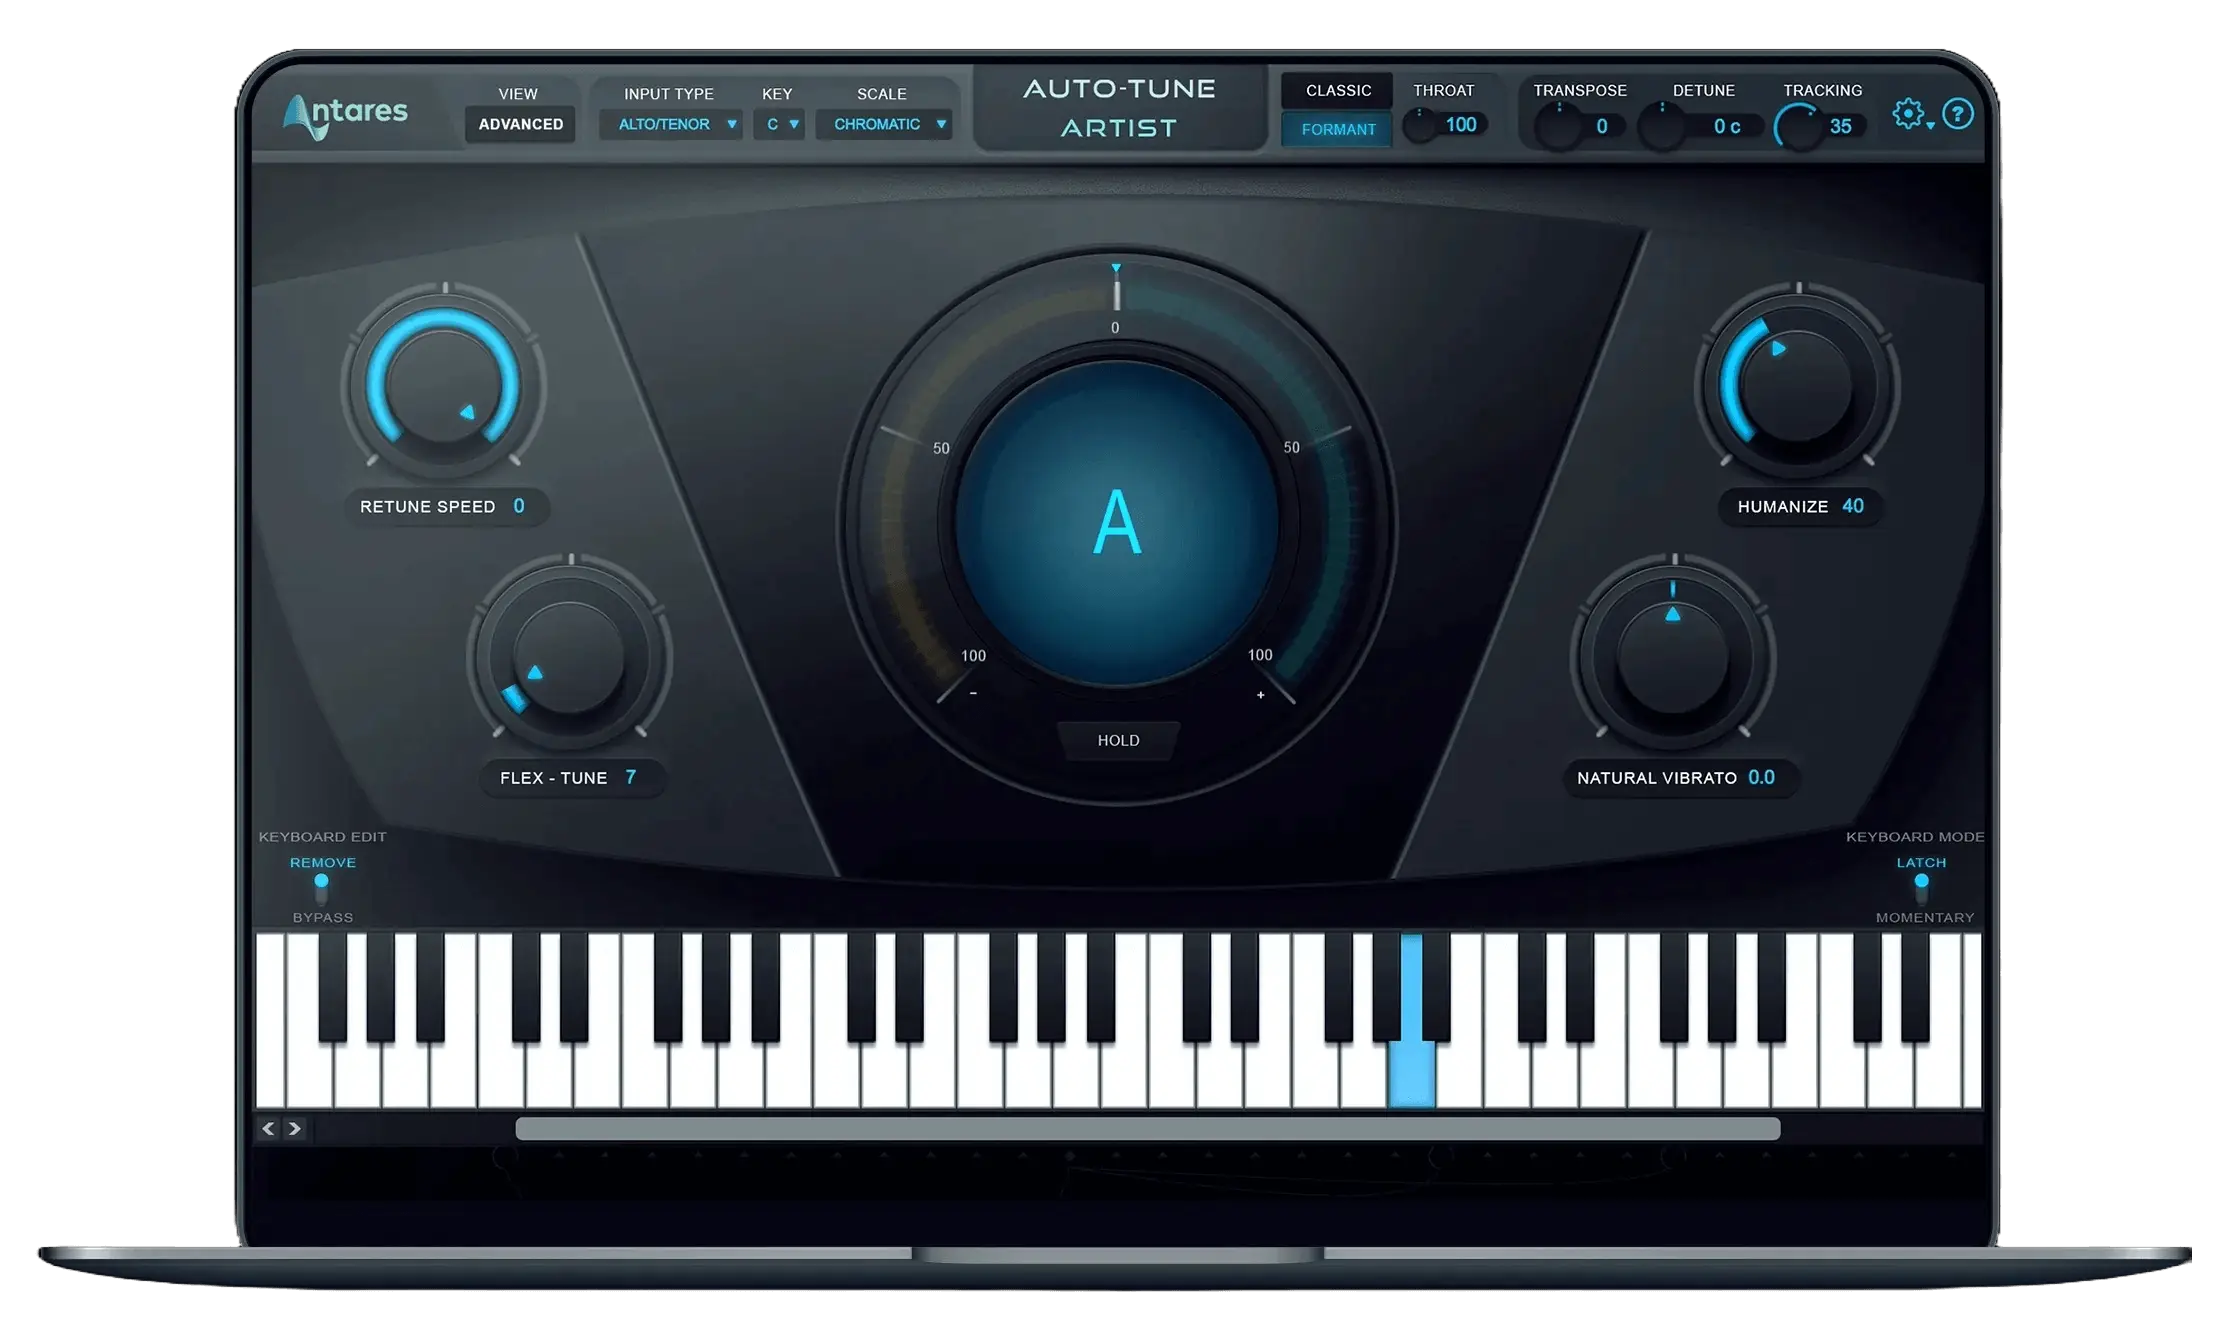 image to auto-tune pro x plugin show a keyboard and up a A key with rudders en black background.